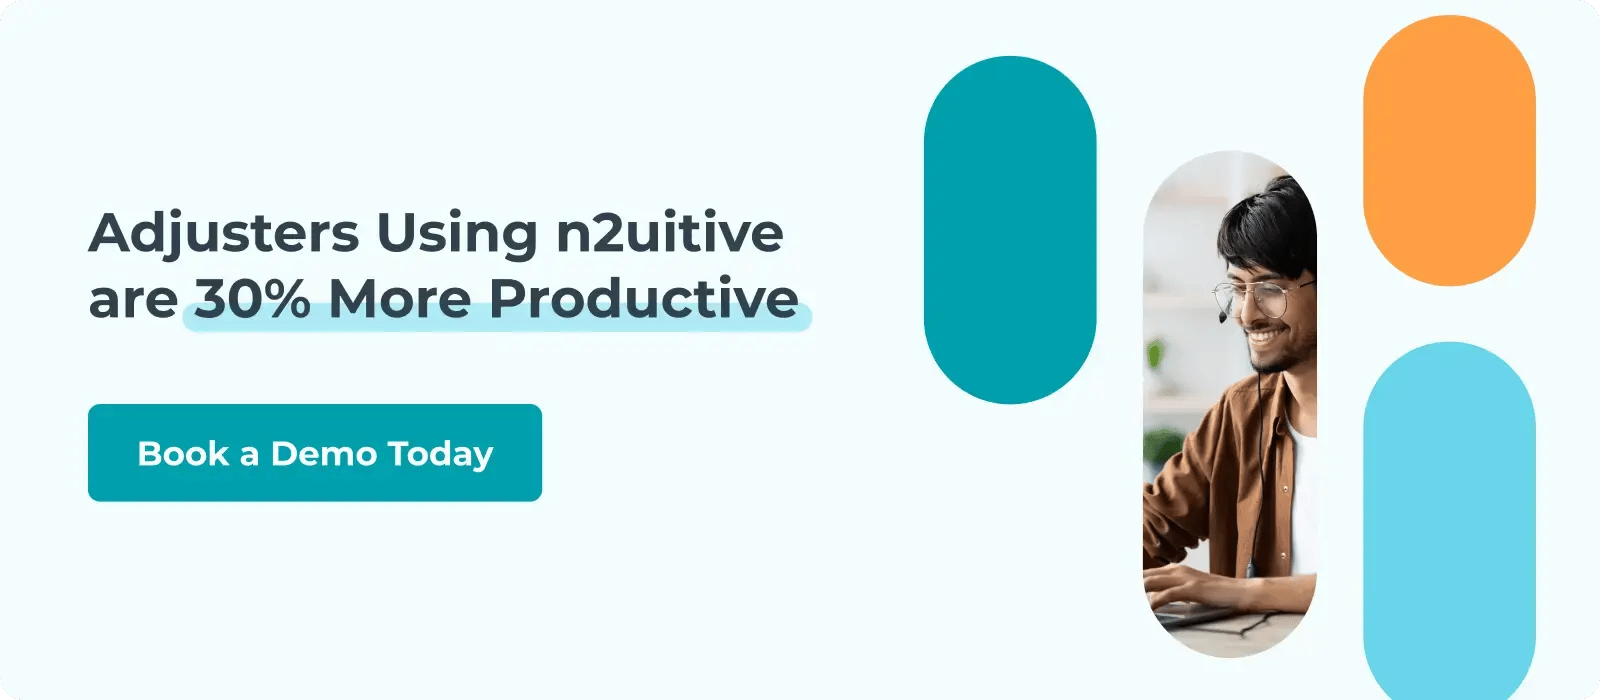 get a demo of n2uitive and become 30% more productive